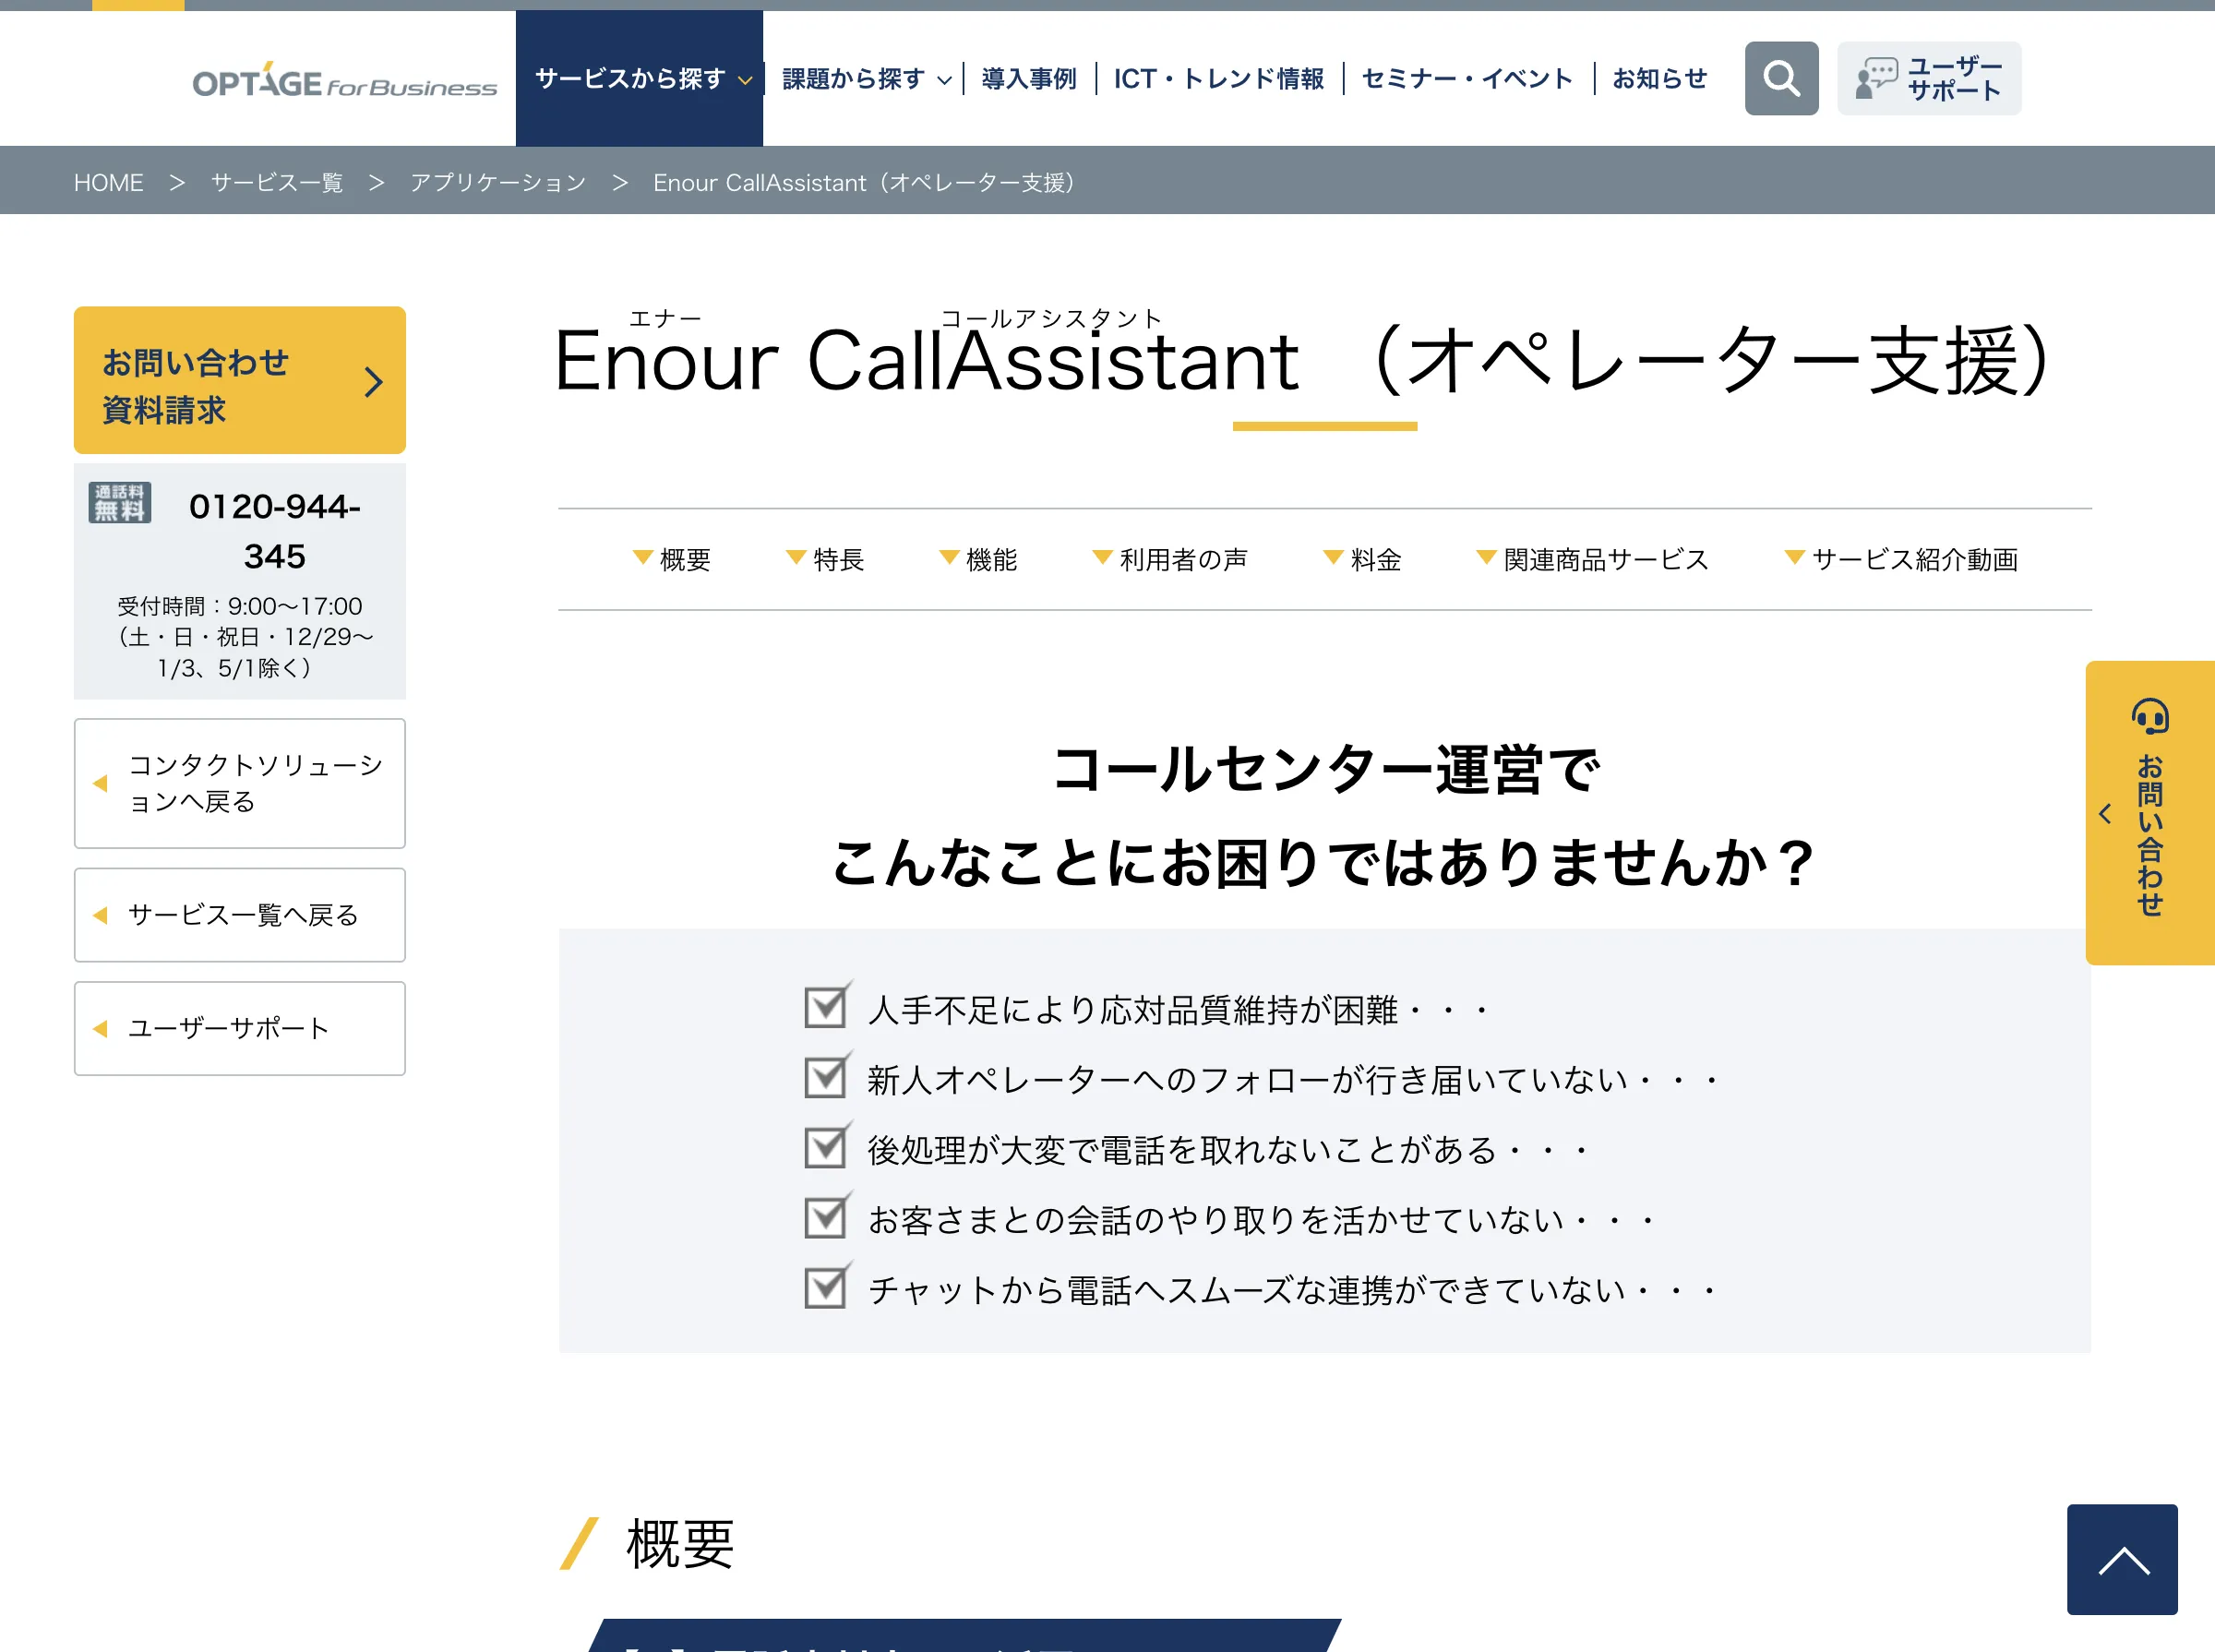 Enour CallAssistant(株式会社オプテージ)